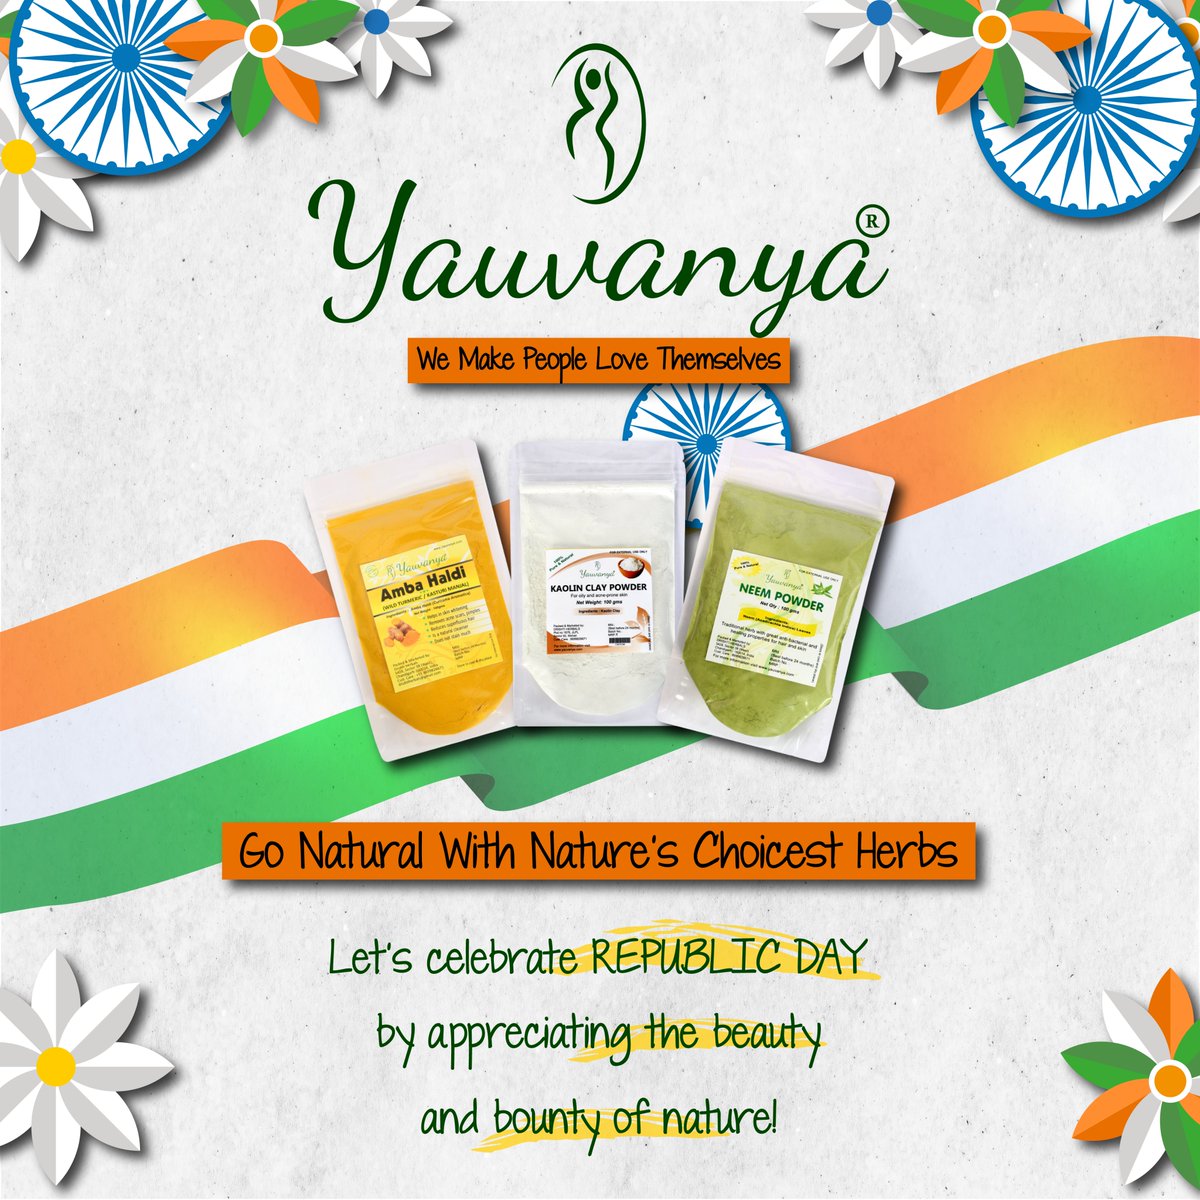 Let's celebrate REPUBLIC DAY by appreciating the beauty and bounty of nature.
# ONE_NATION # ONE_VISION # ONE_IDENTITY
#JaiHind

#yauvanya #natureschoicestherbs #drishtiherbals #herbalbrand #plantbasedproducts #74threpublicday #26january #freedom #tiranga #swachchbharat #twitter